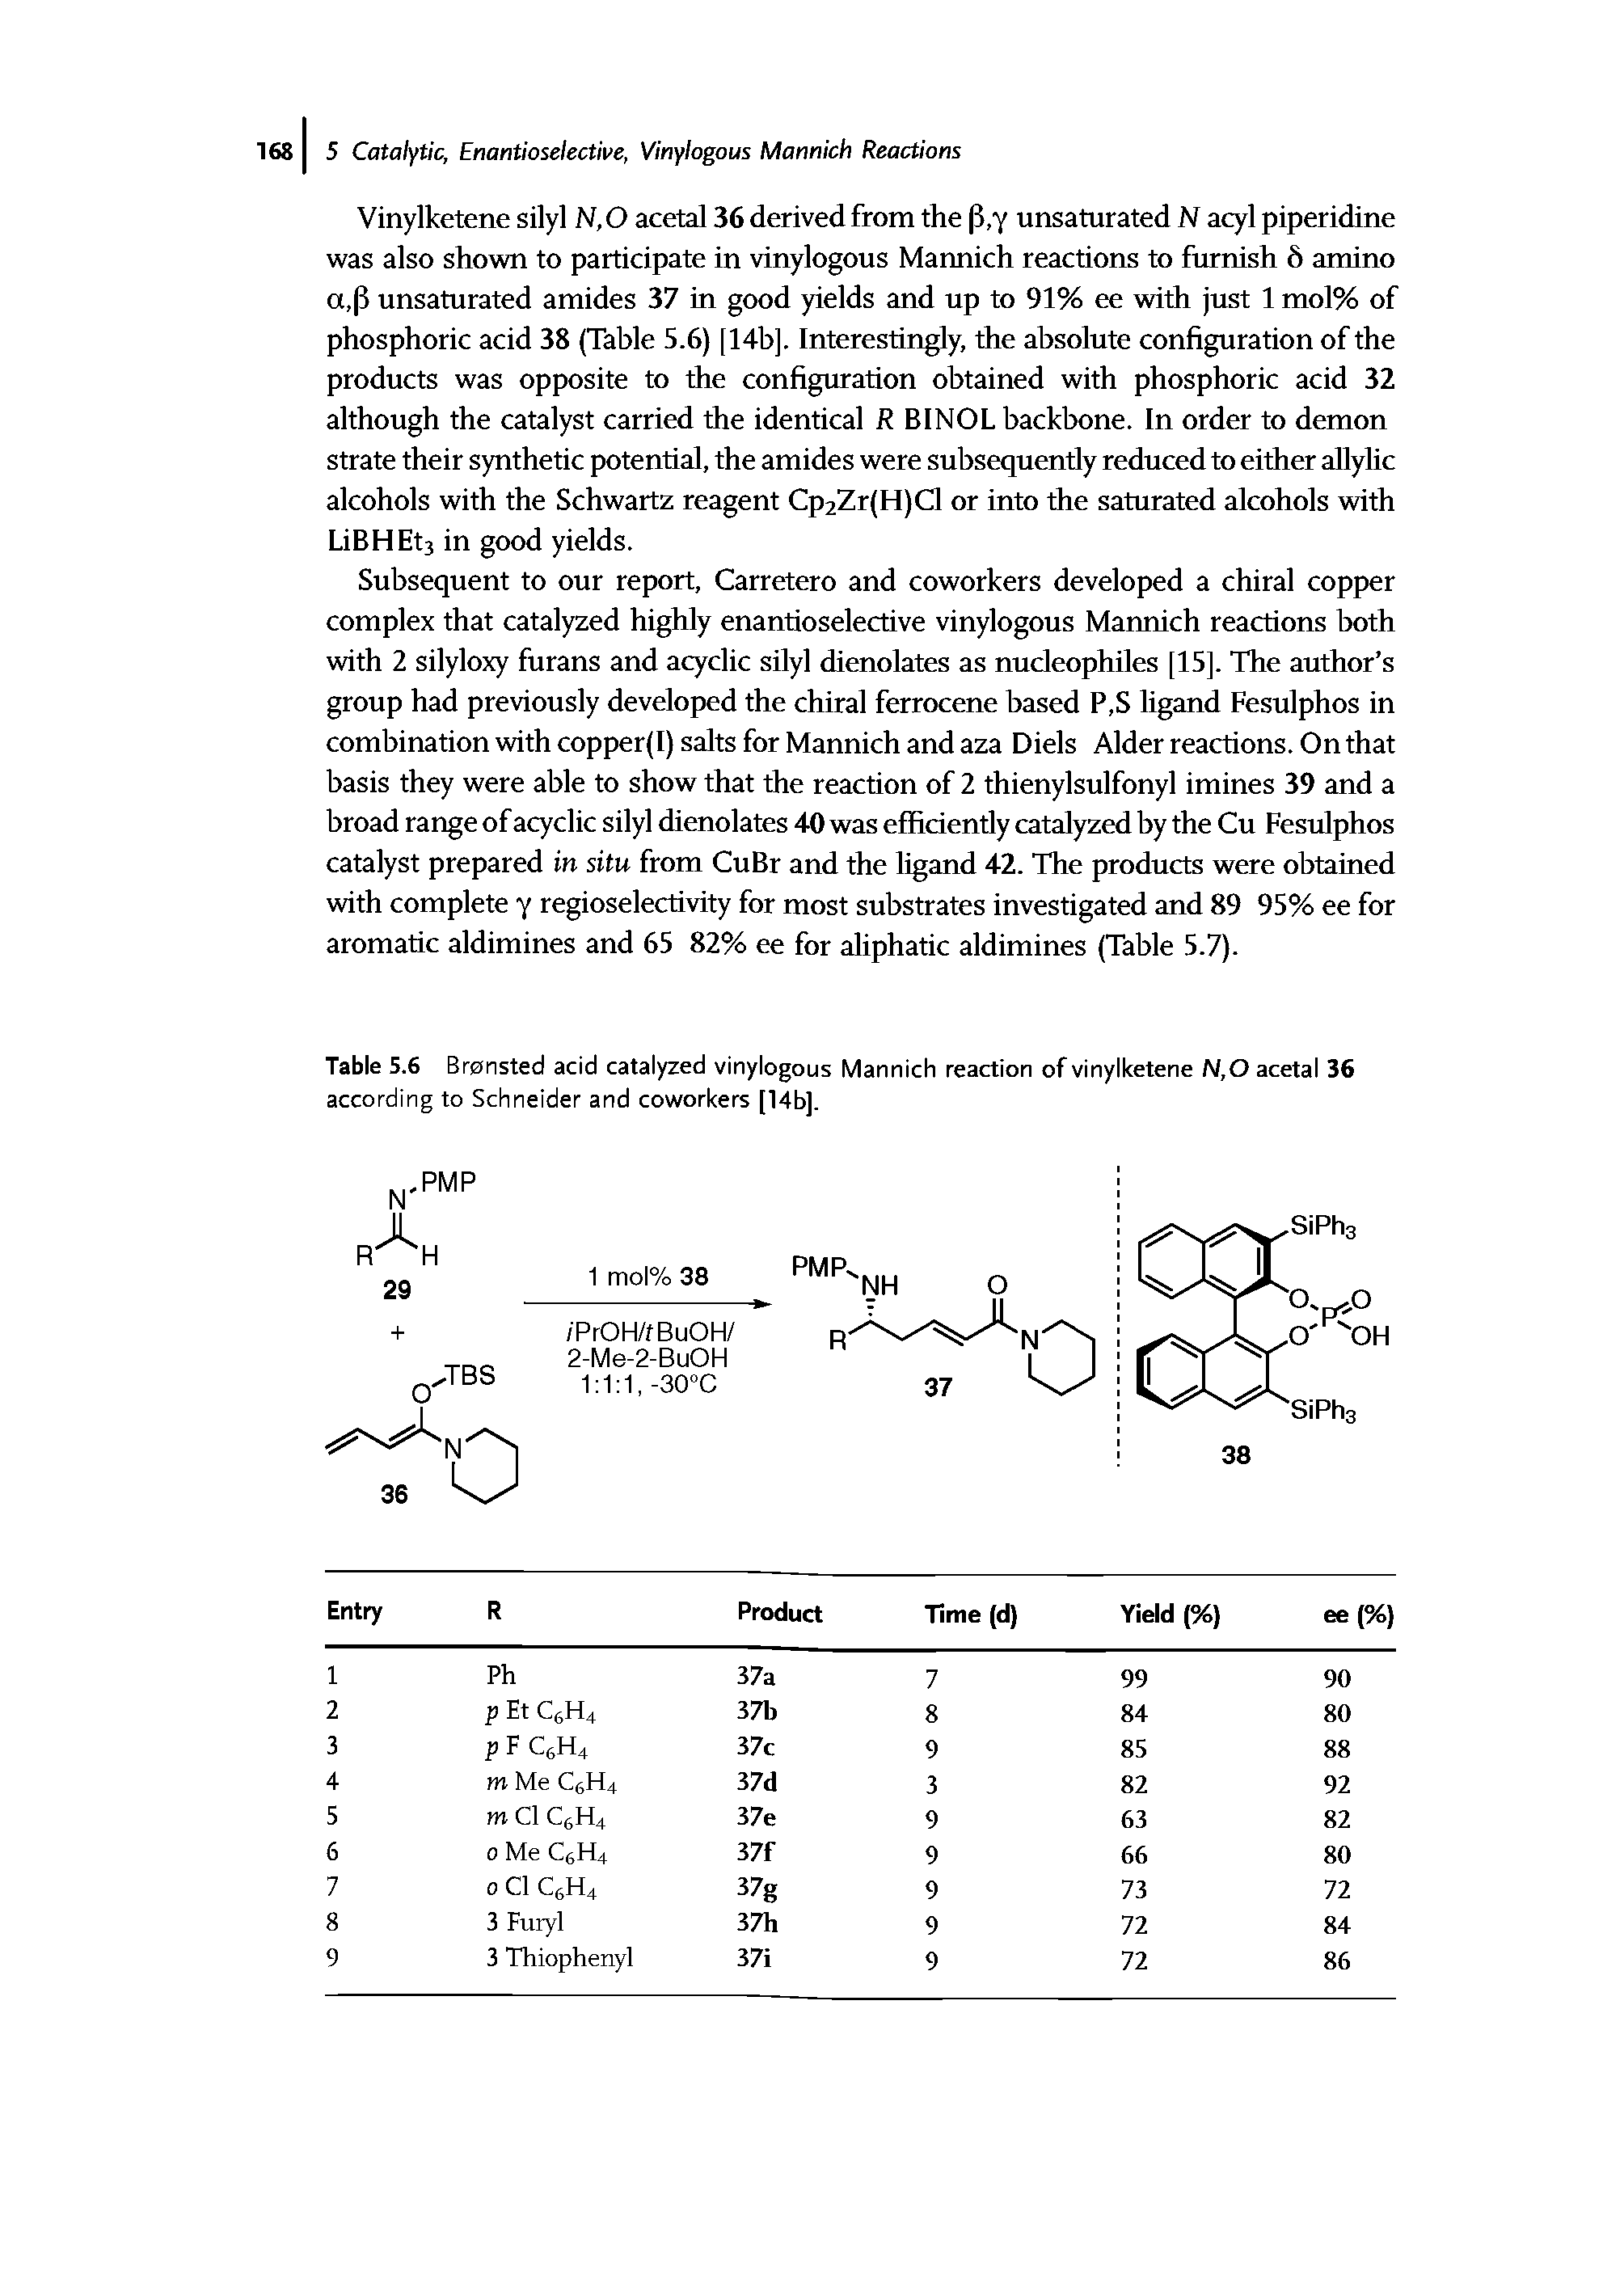 Table 5.6 Bronsted acid catalyzed vinylogous Mannich reaction of vinylketene N,O acetal 36 according to Schneider and coworkers [14b].